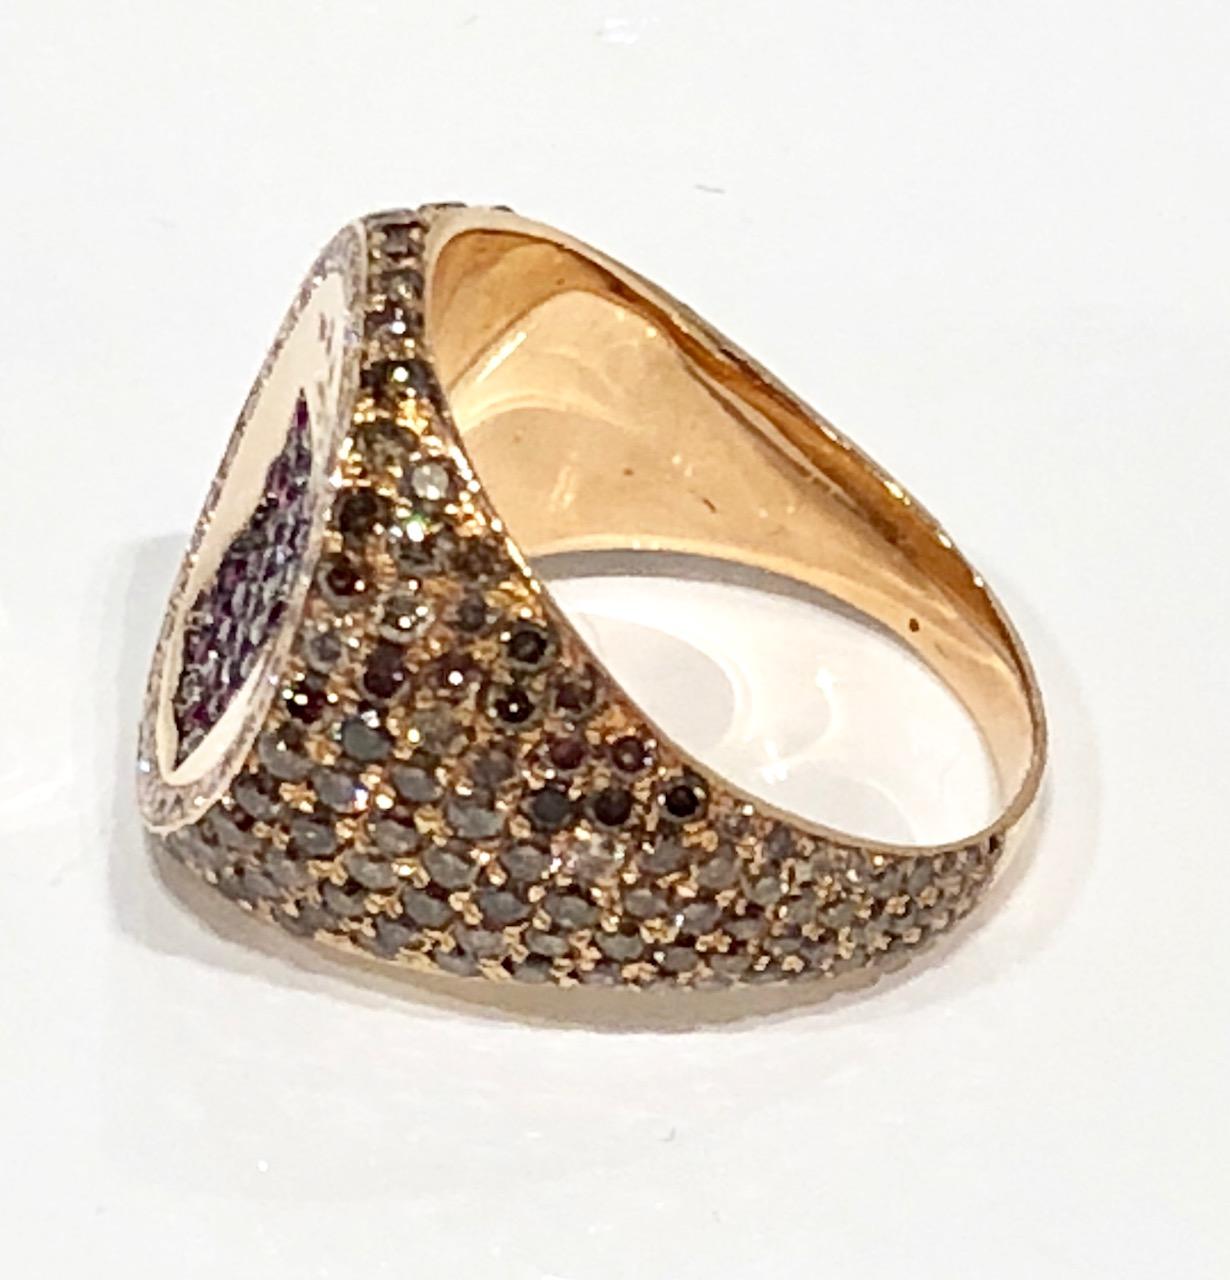 Unisex Signet ring in 18k rose gold, ruby and white diamond crown ring with cognac pave diamond shank.
Designed by Martyn Lawrence Bullard
Can be made in any size, lead time 4 weeks